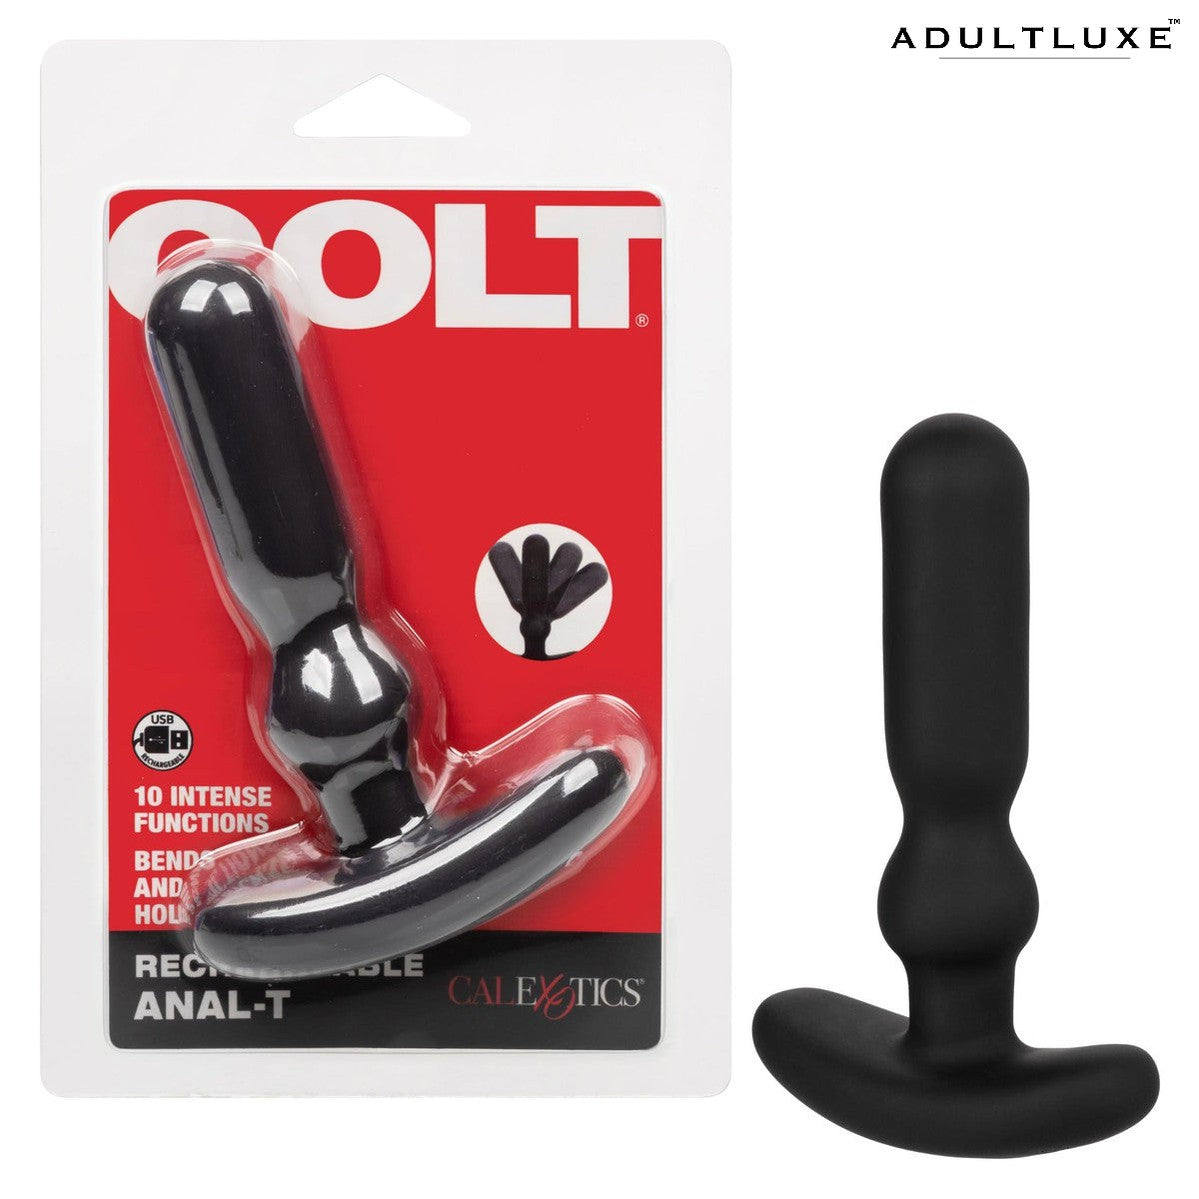 Colt Rechargeable Anal-T Vibrating Butt Plug